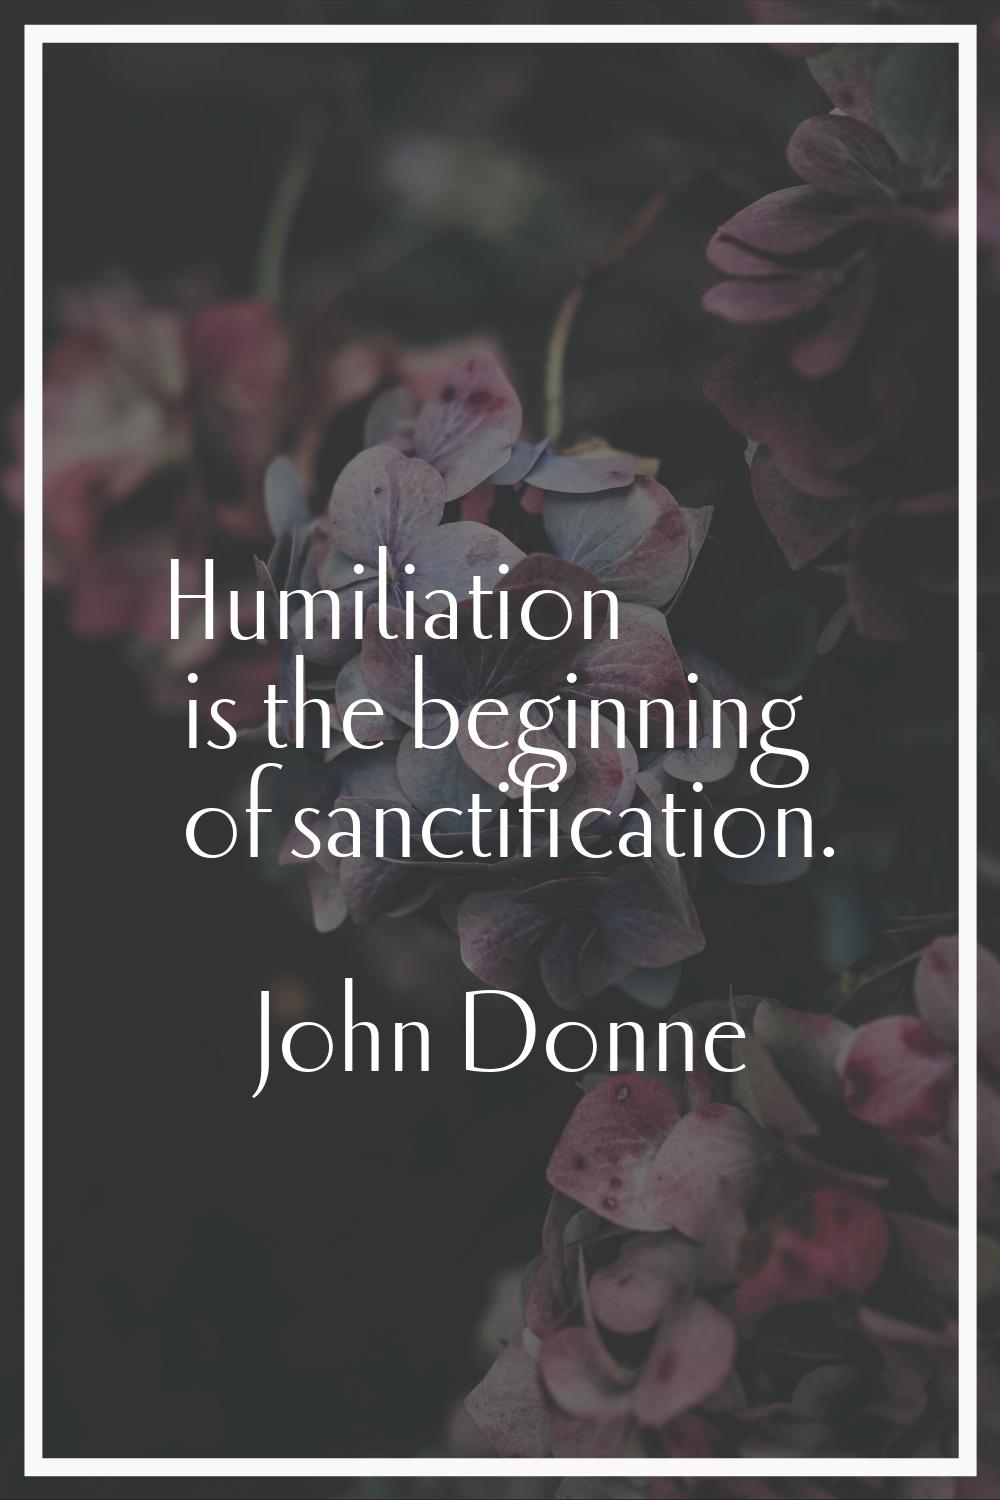 Humiliation is the beginning of sanctification.